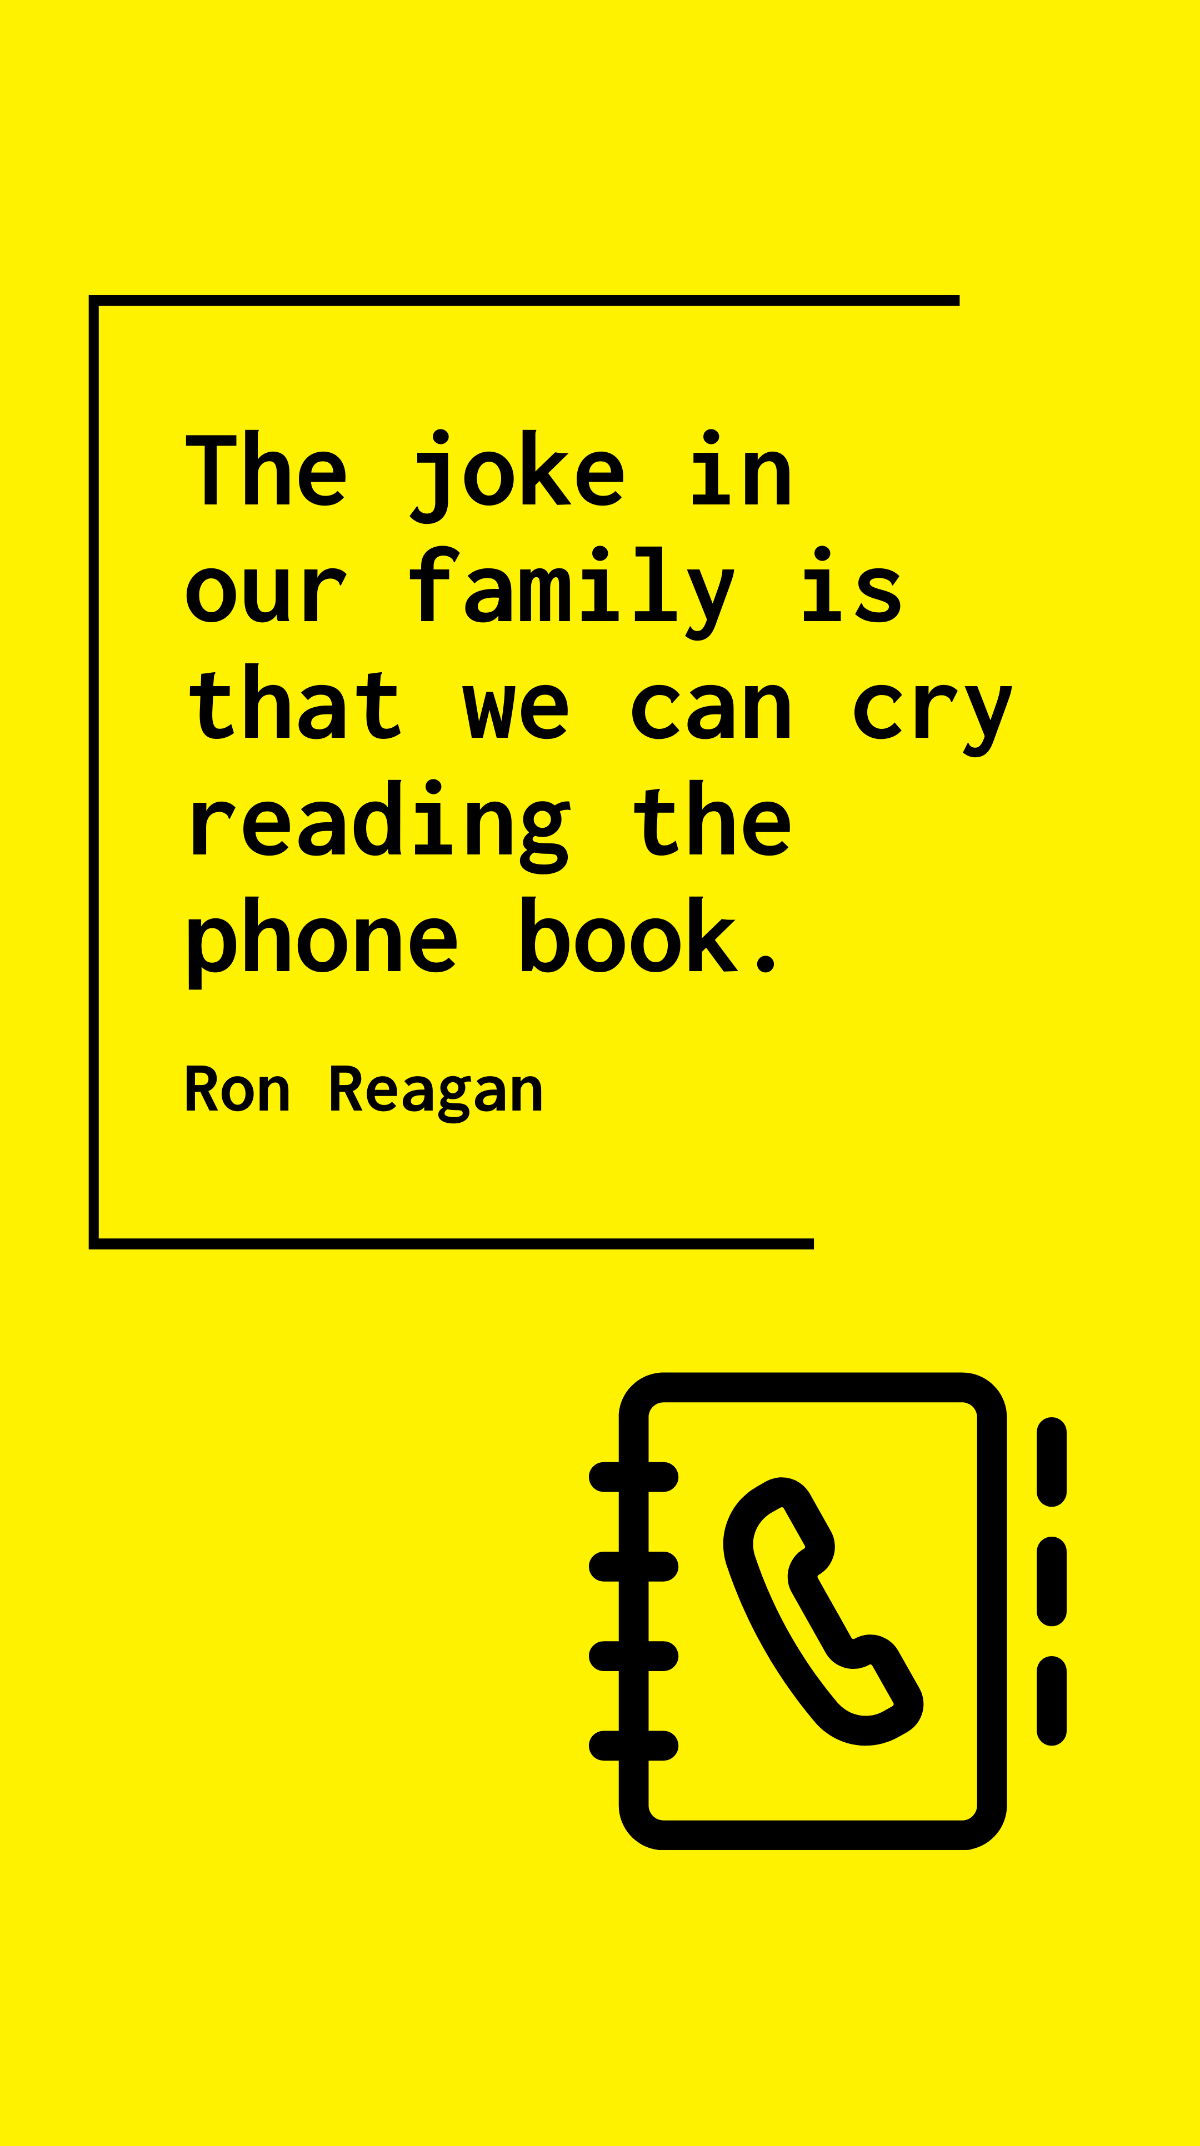 Ron Reagan - The joke in our family is that we can cry reading the phone book.